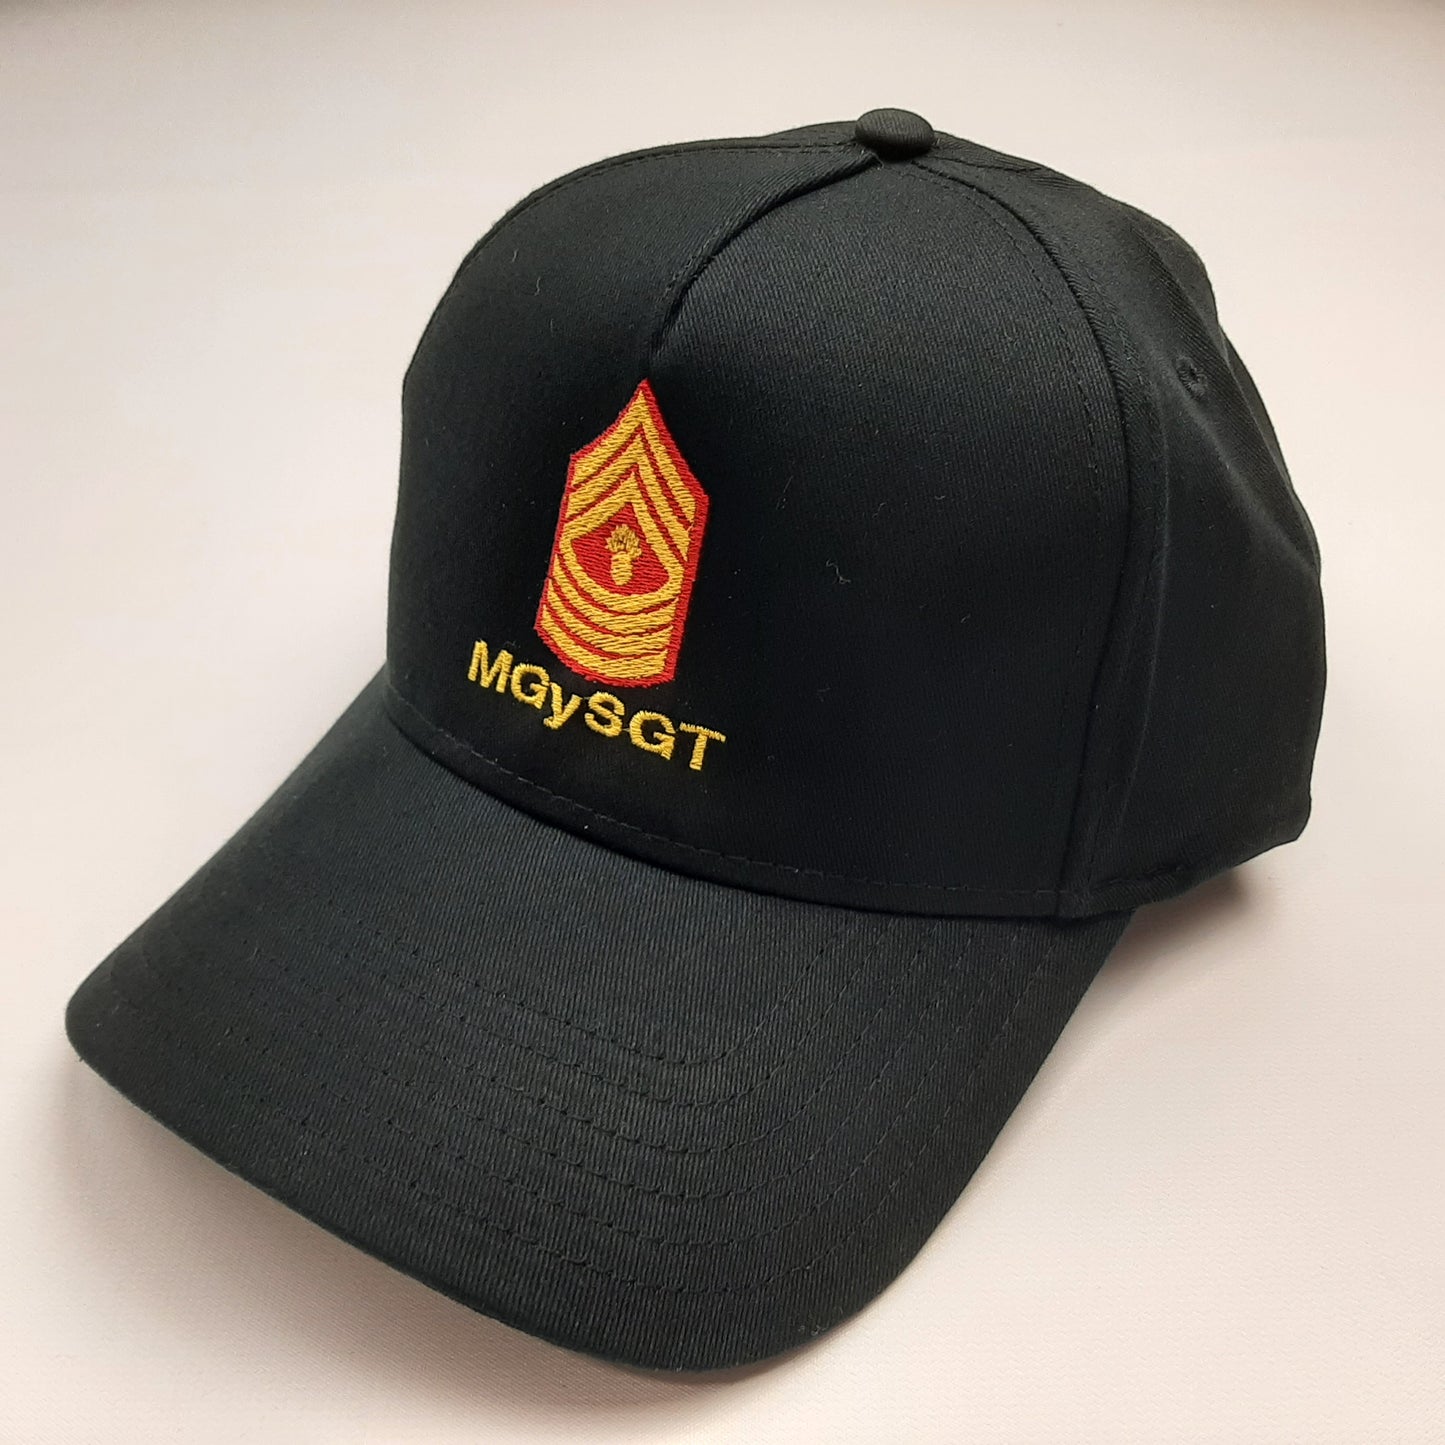 MGYSGT Master Gunnery Sergeant Men's Ball Cap Hat Black Embroidered Cotton